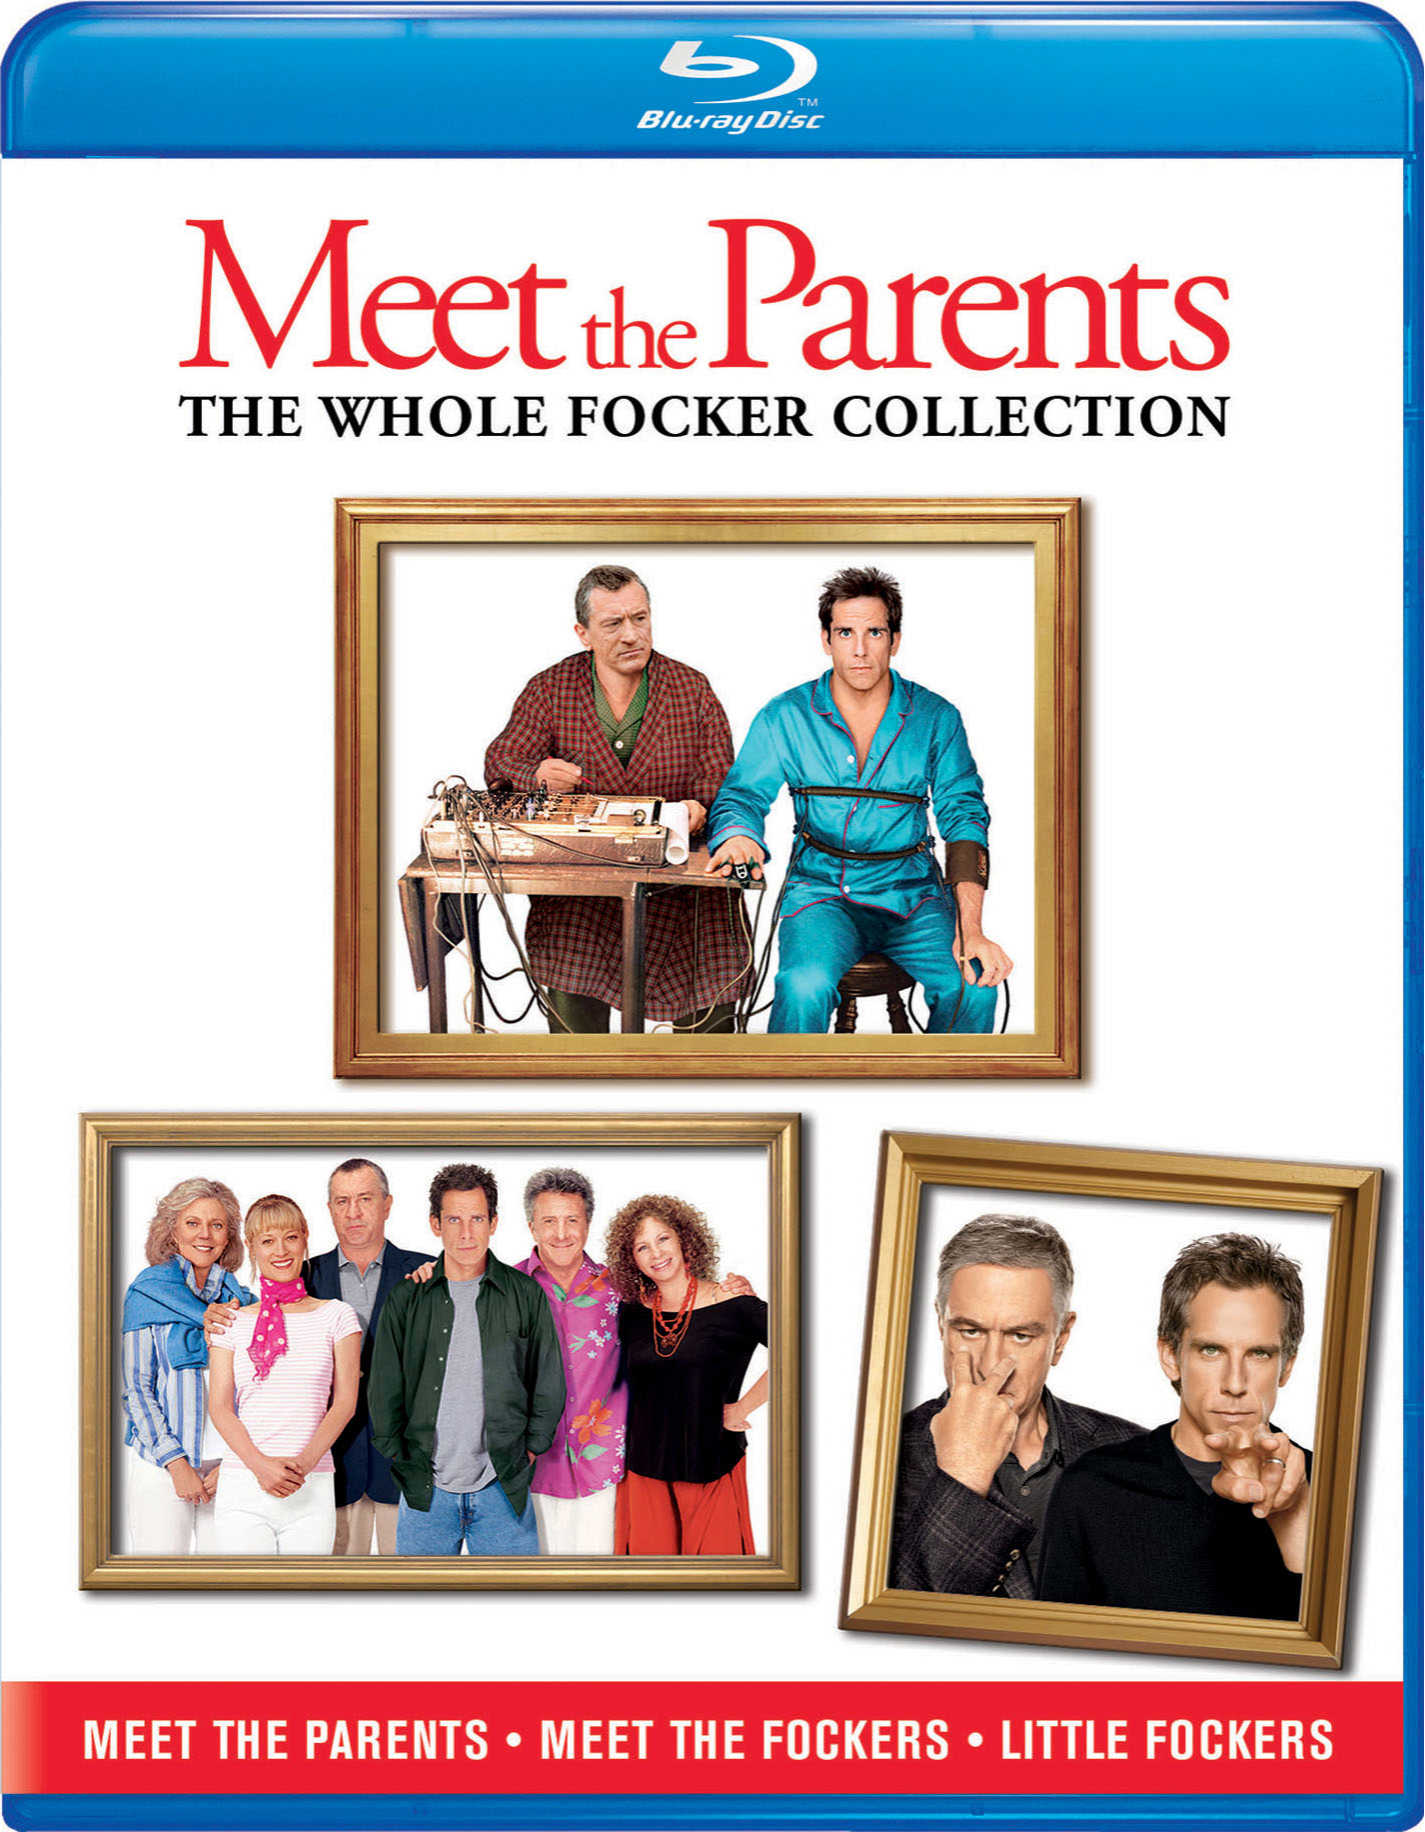 Meet The Parents/Meet The Fockers/Little Fockers (Blu-ray Set) - Blu-ray   - Comedy Movies On Blu-ray - Movies On GRUV